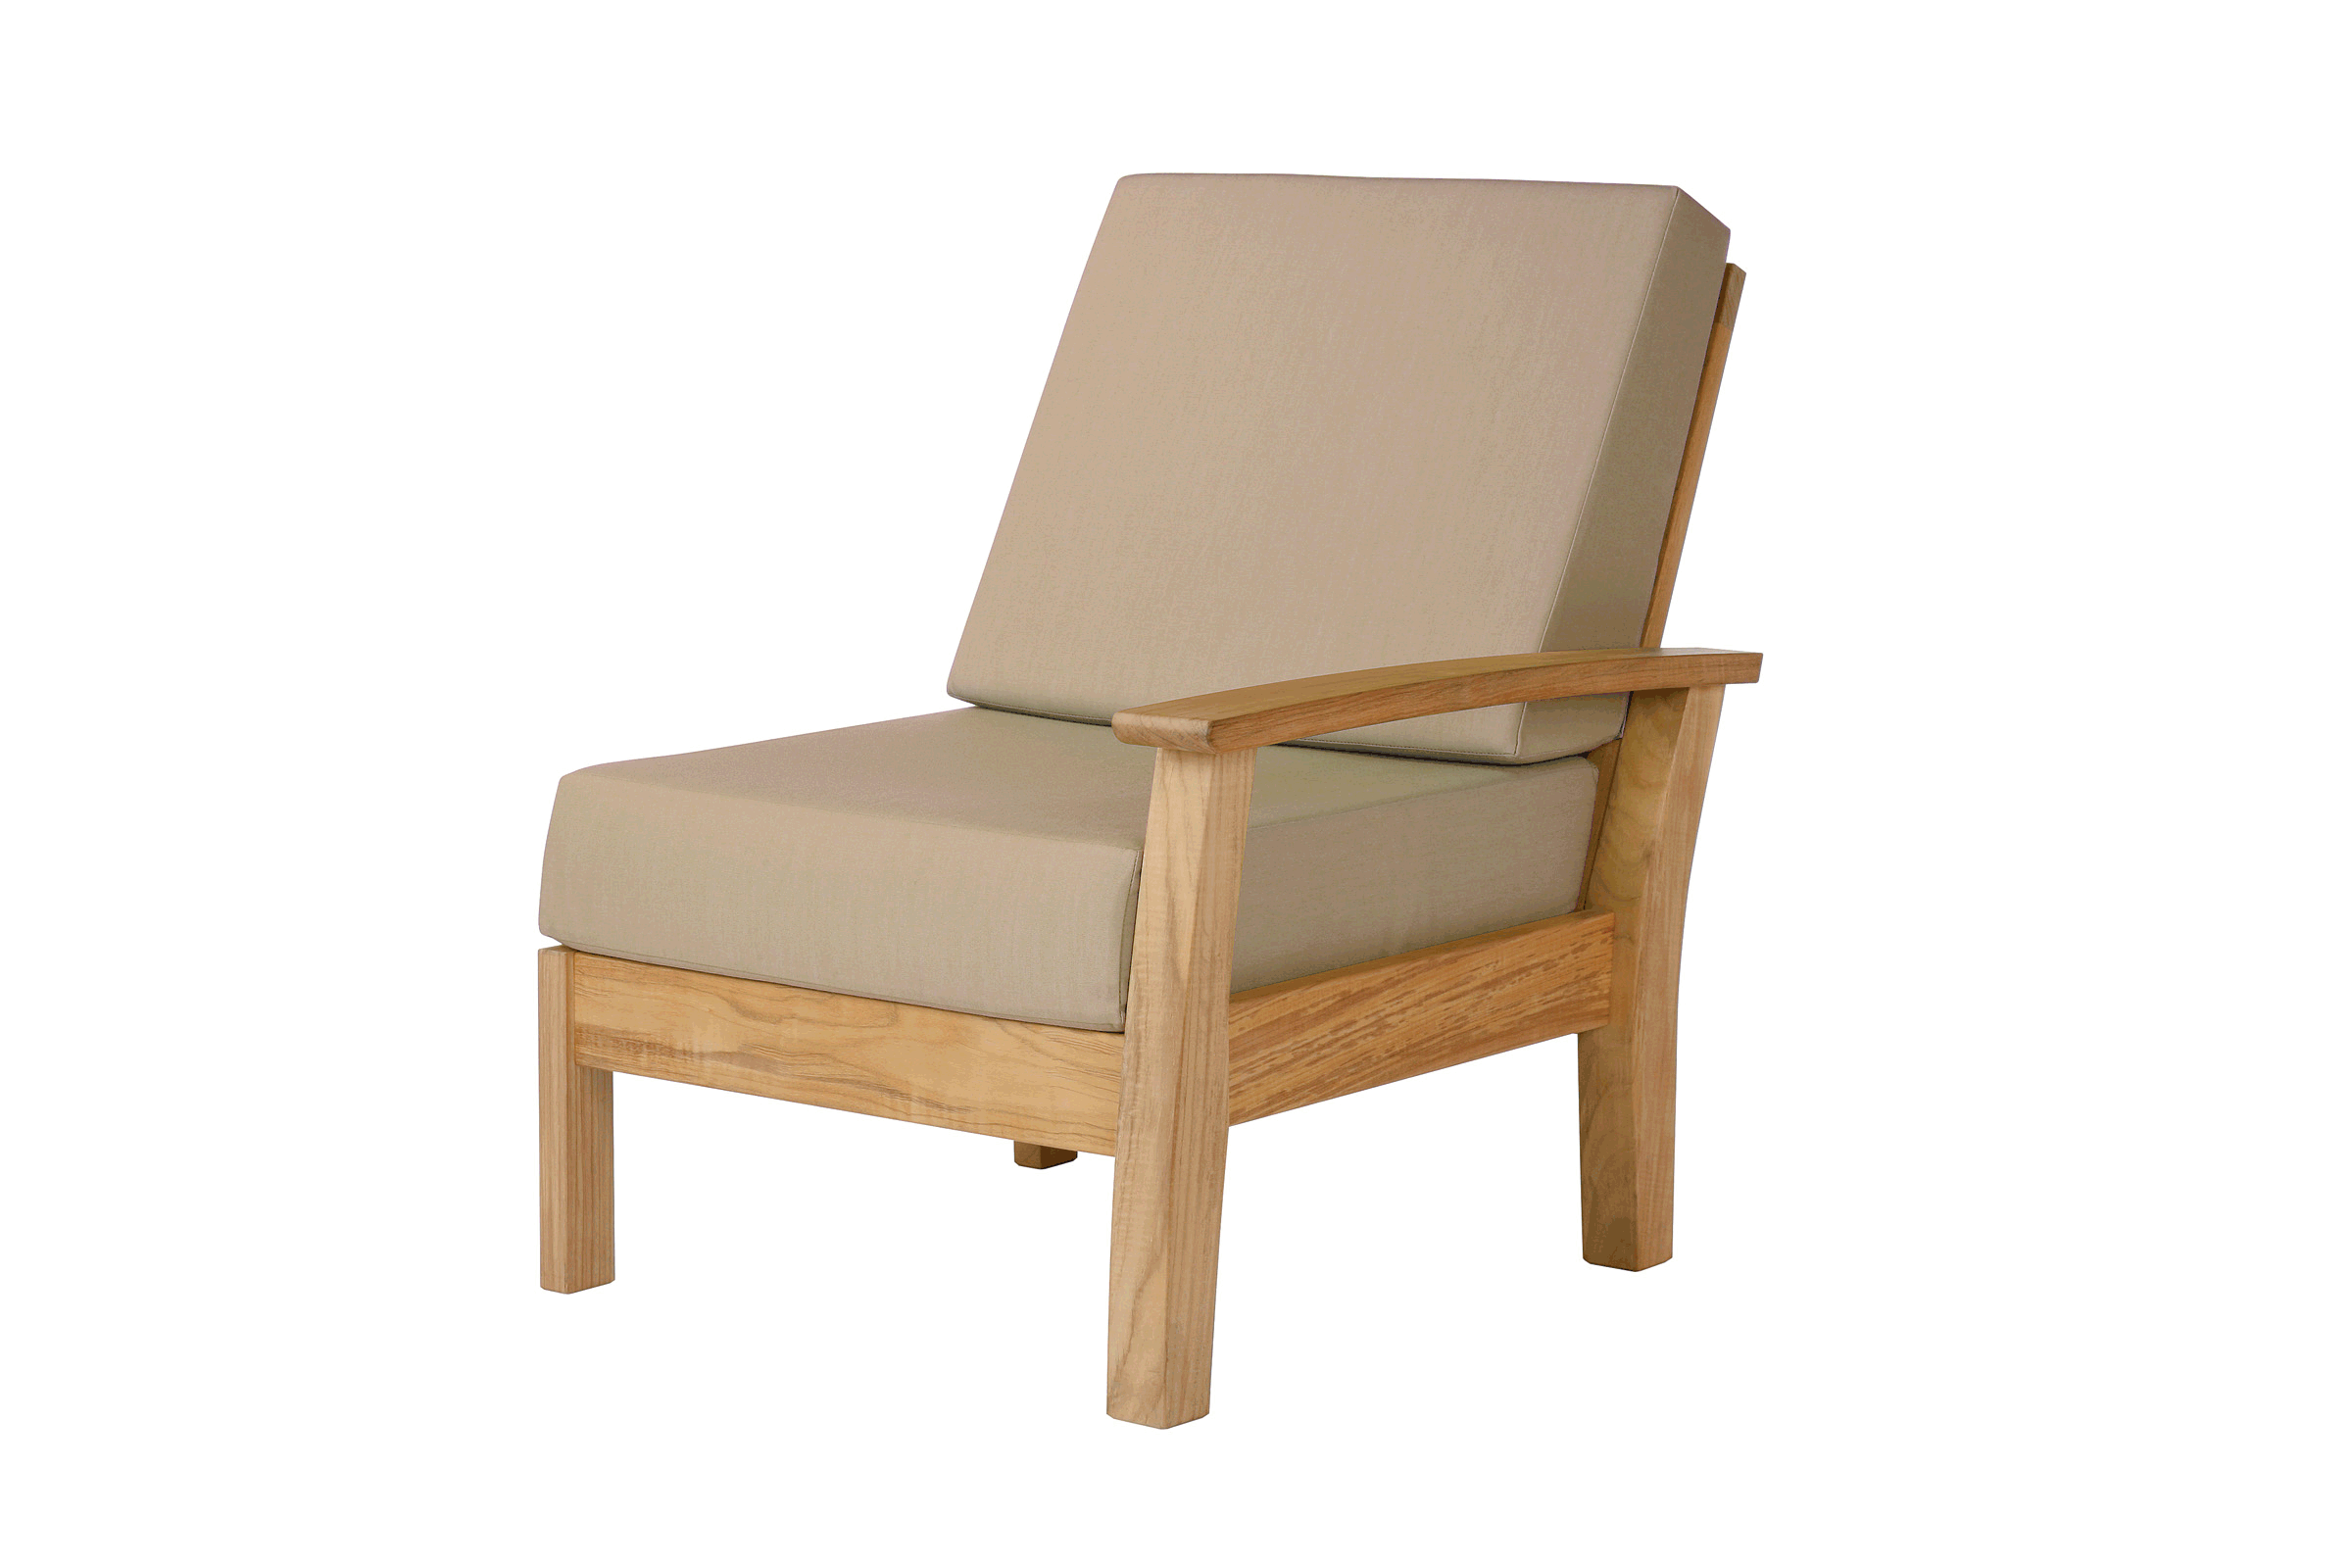 Barlow Tyrie Haven Teak Deep Seating Right Arm Facing Frame